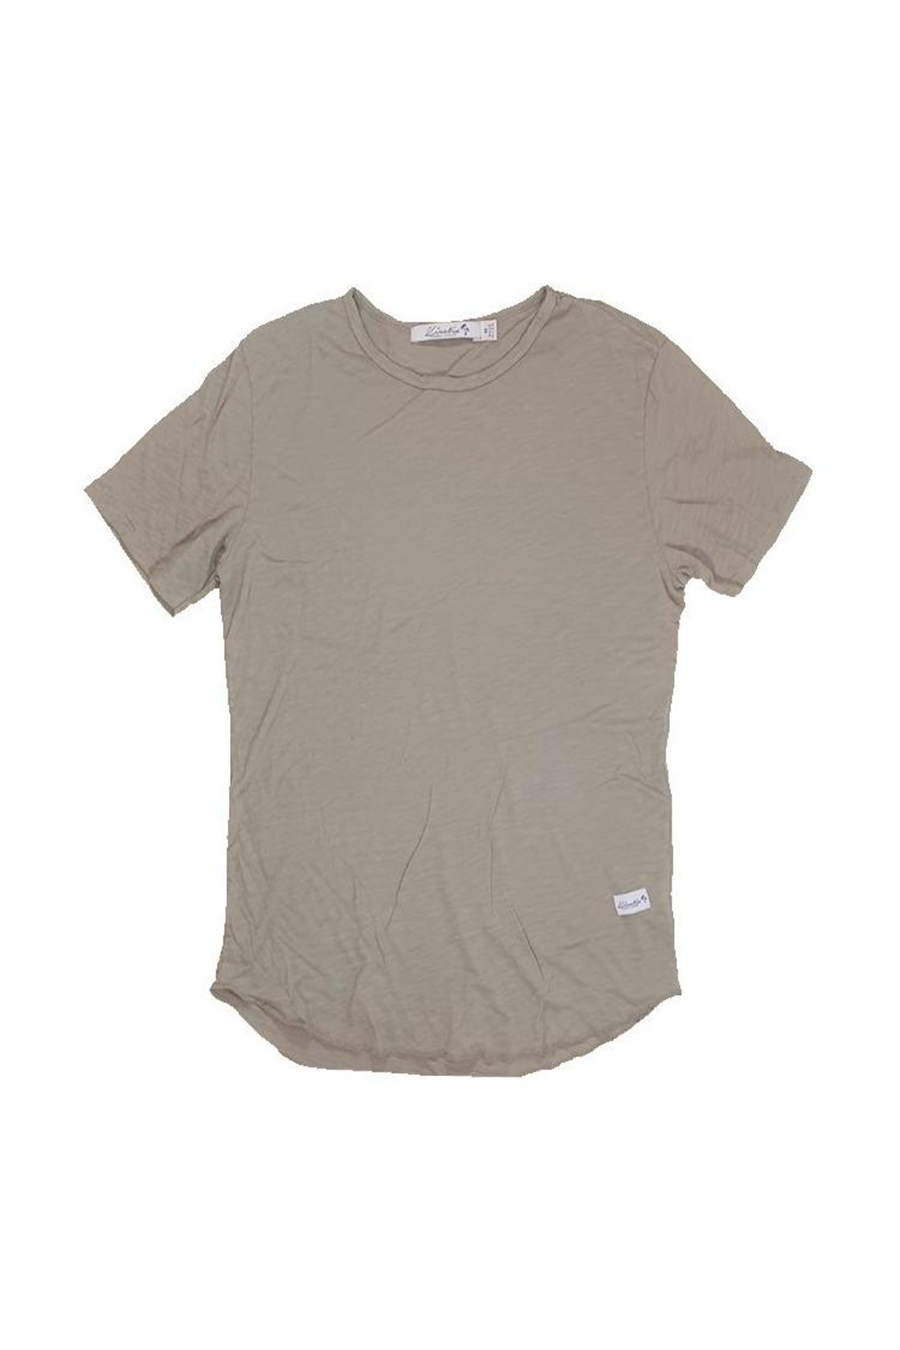 4 Corners Basic Tee | Army Green - Main Image Number 1 of 1